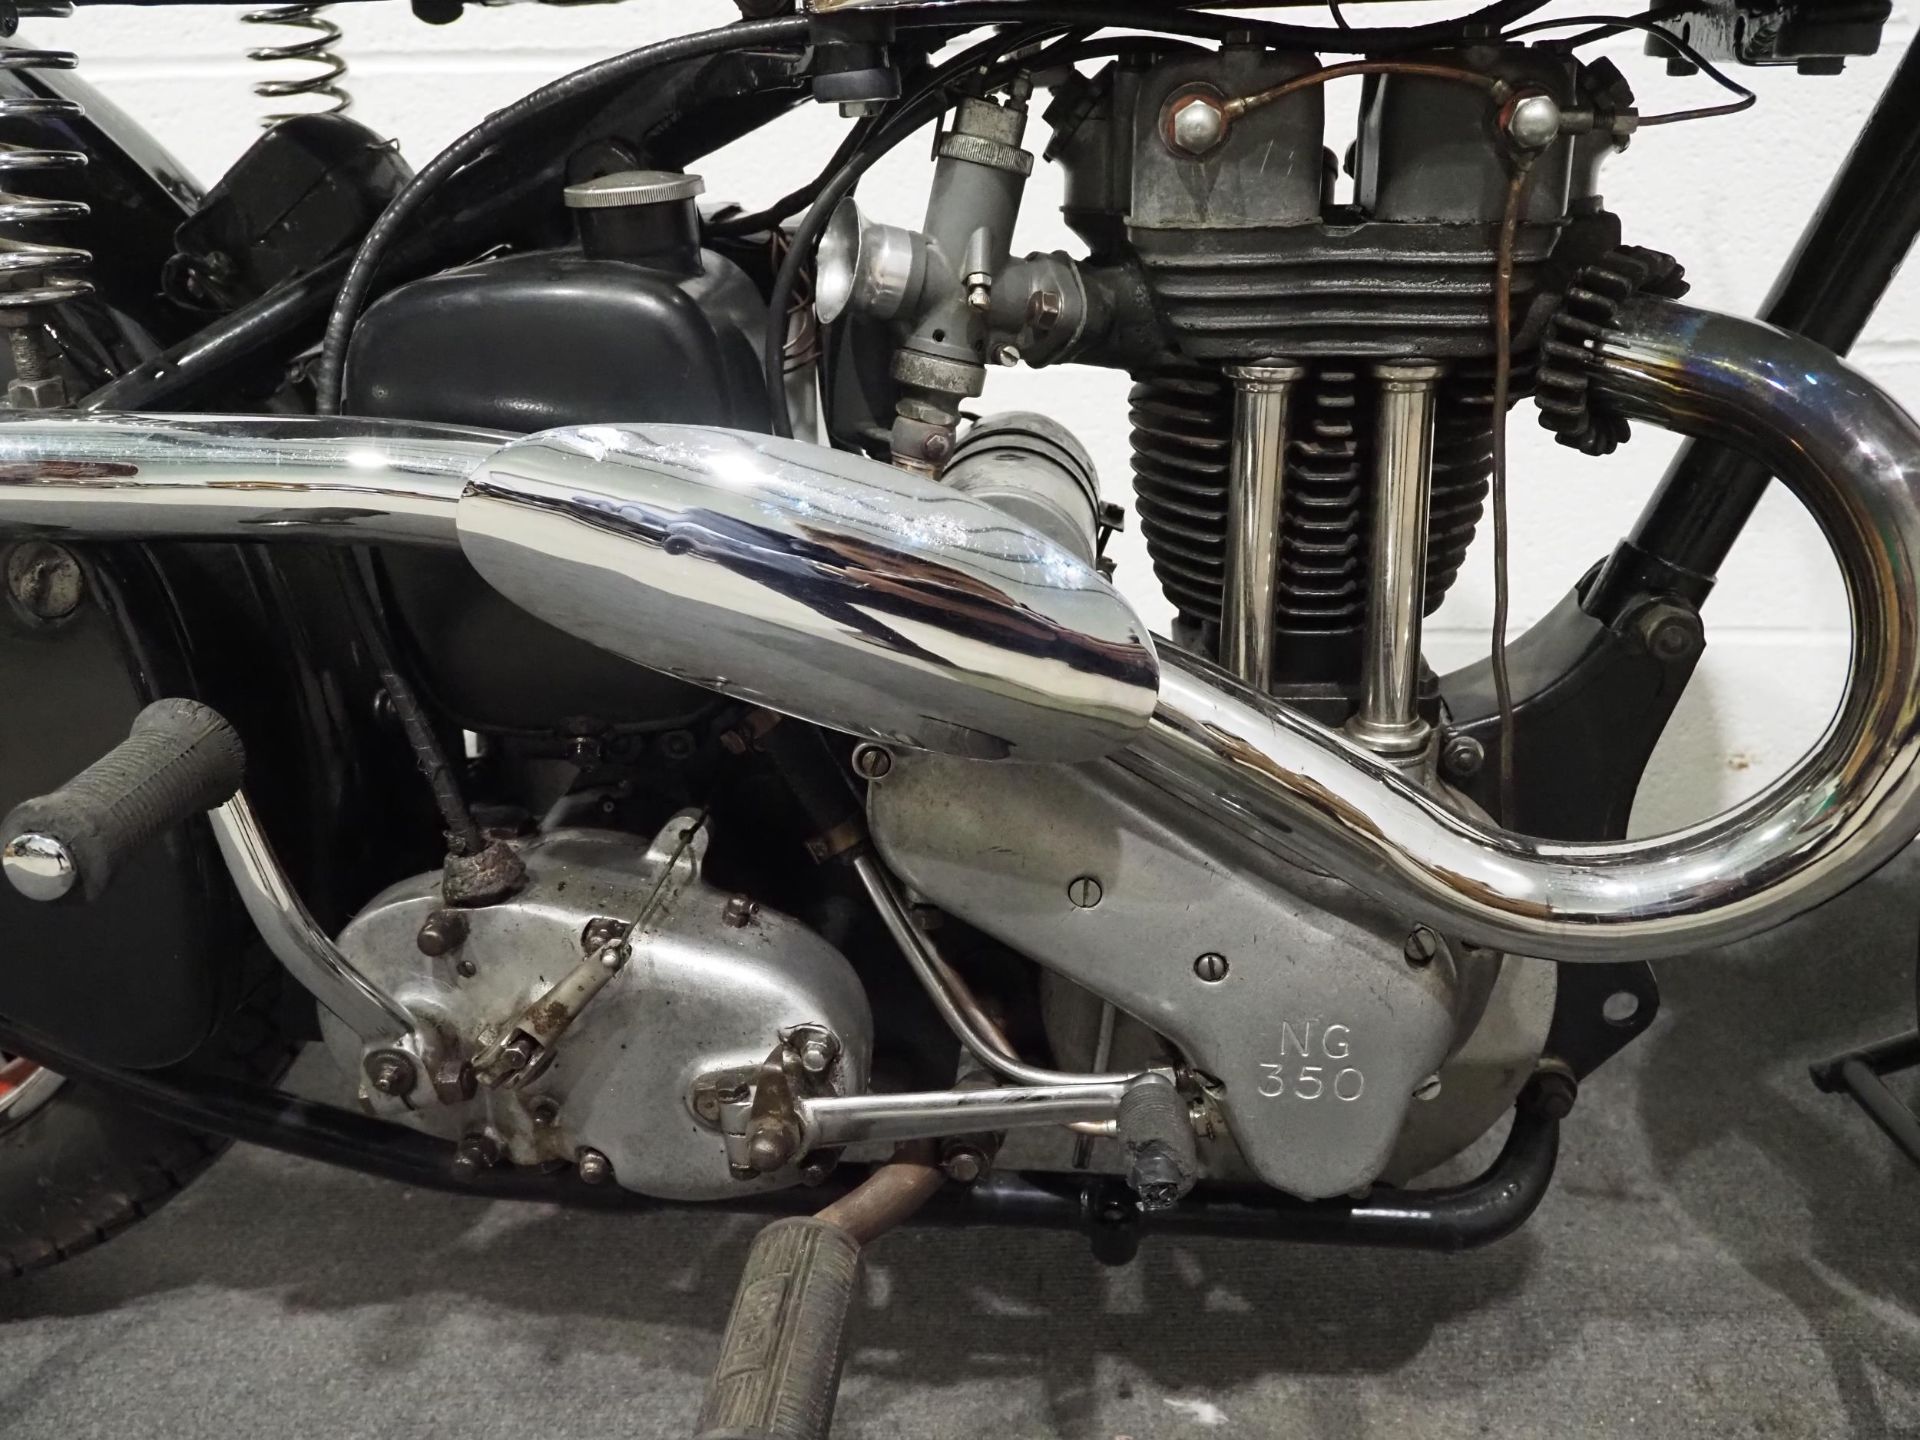 Ariel NG 350 motorcycle, 1948. Frame no. BP13369 Engine no. AJ1594 Has been restored over a few - Image 2 of 11